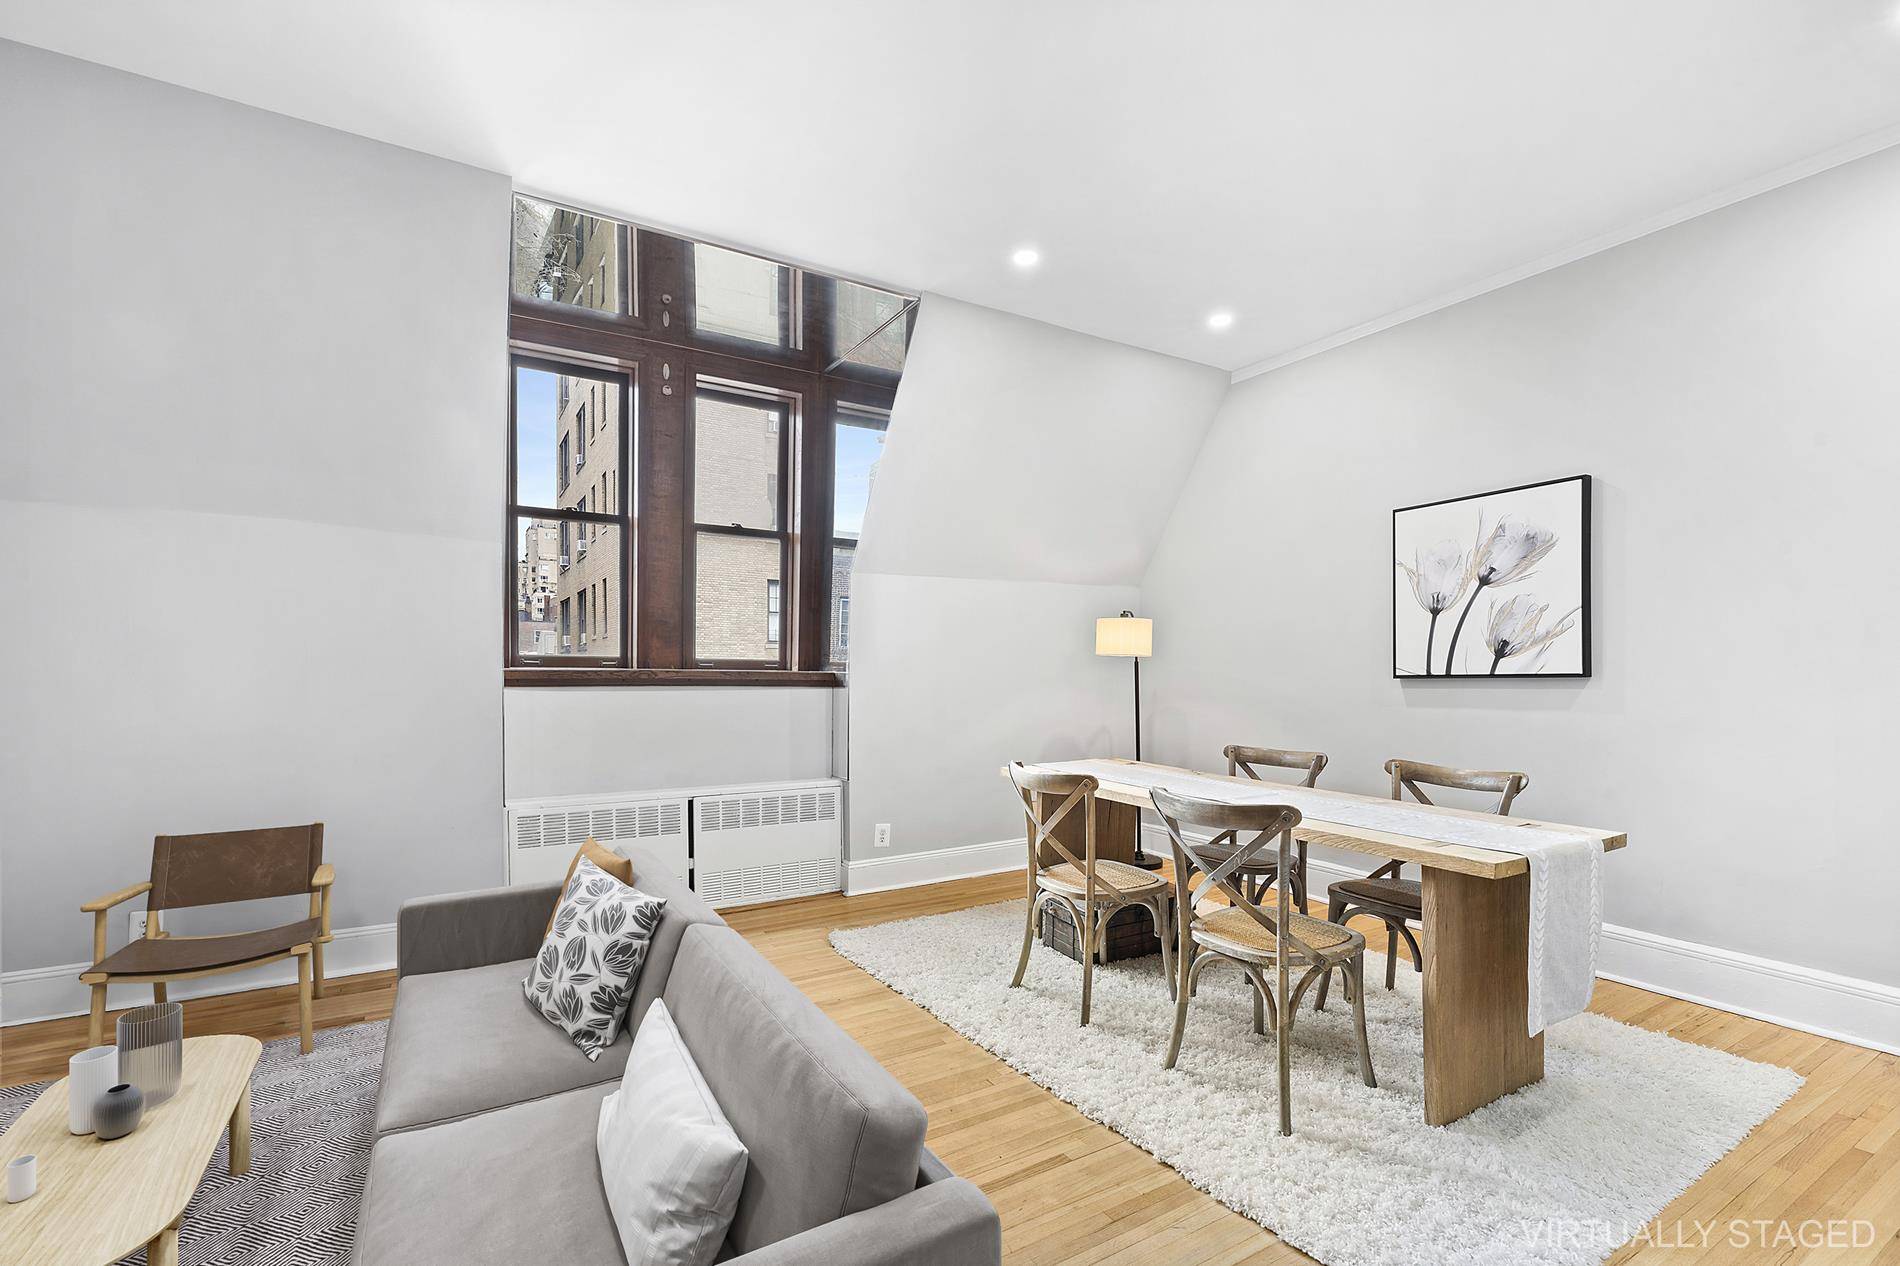 Welcome to this meticulously renovated 1 bedroom, 1.